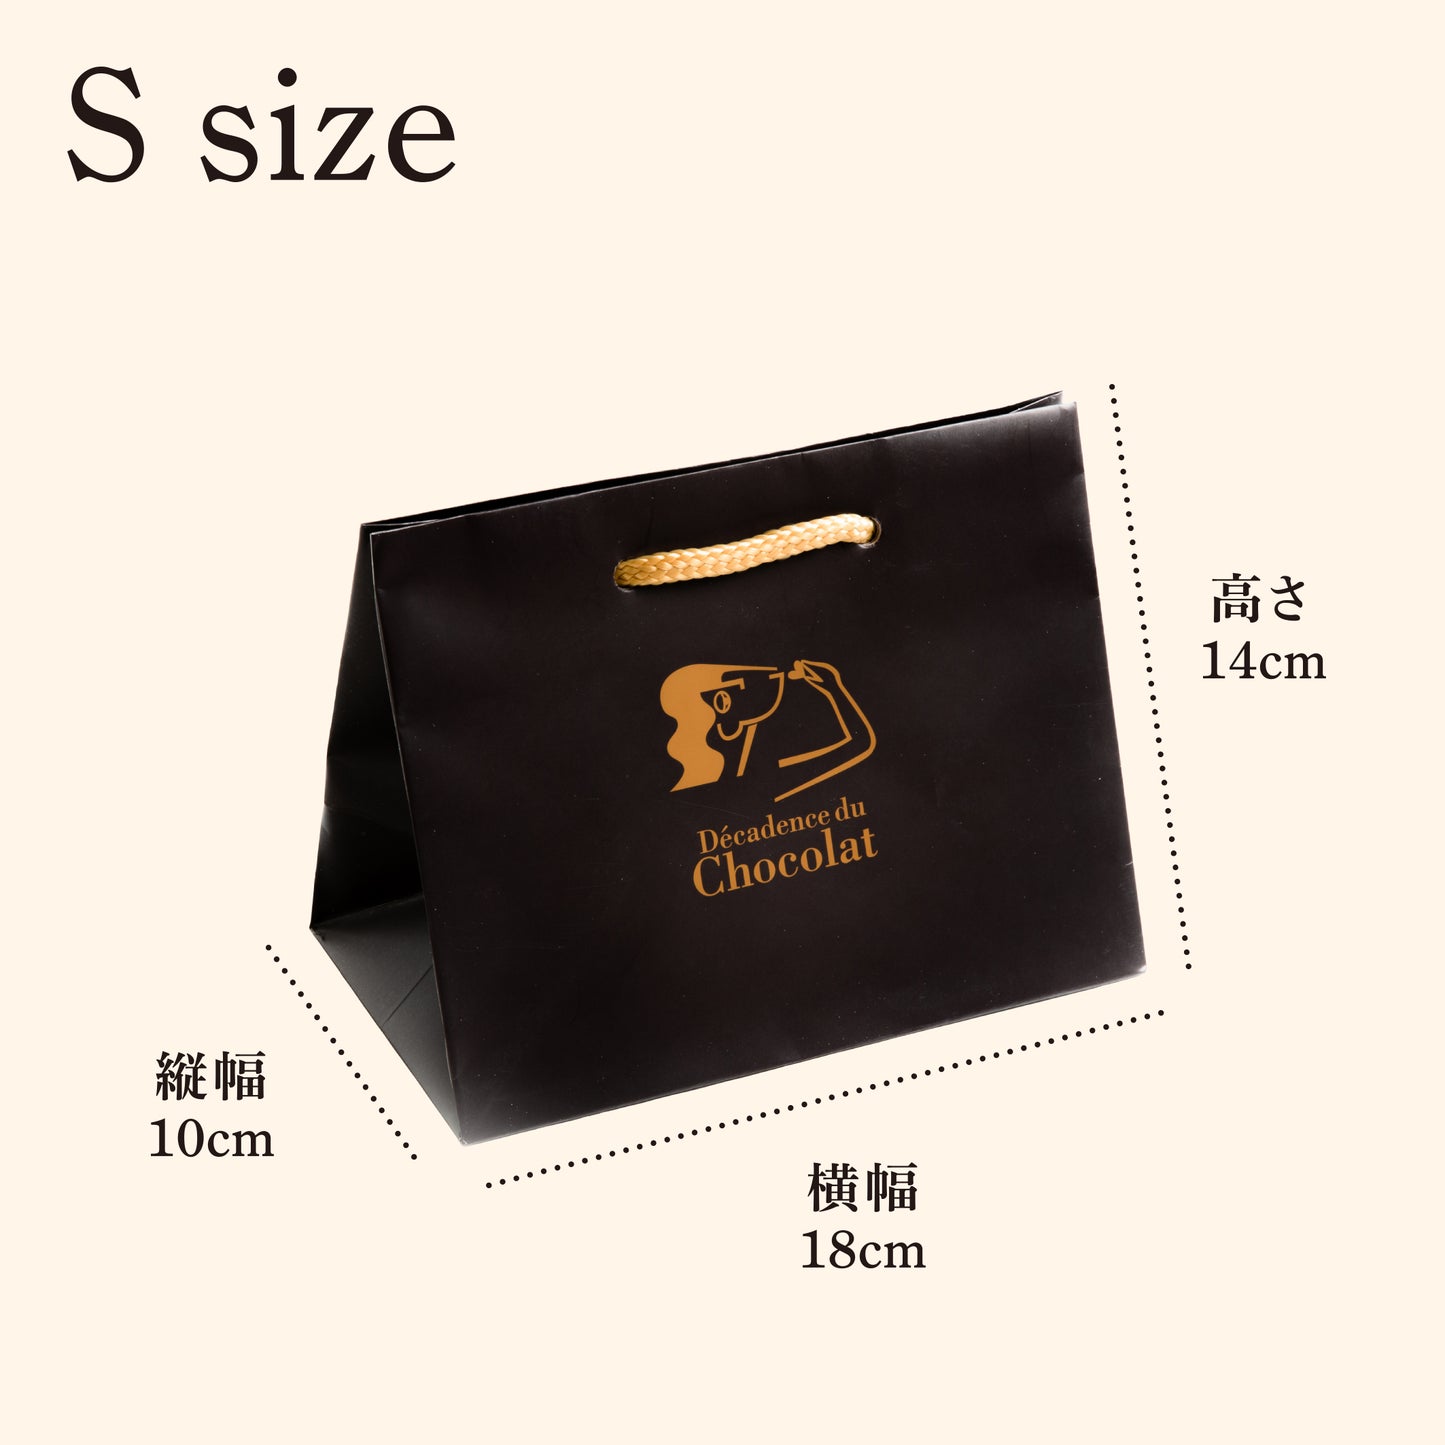 Paper bag with logo (S size)